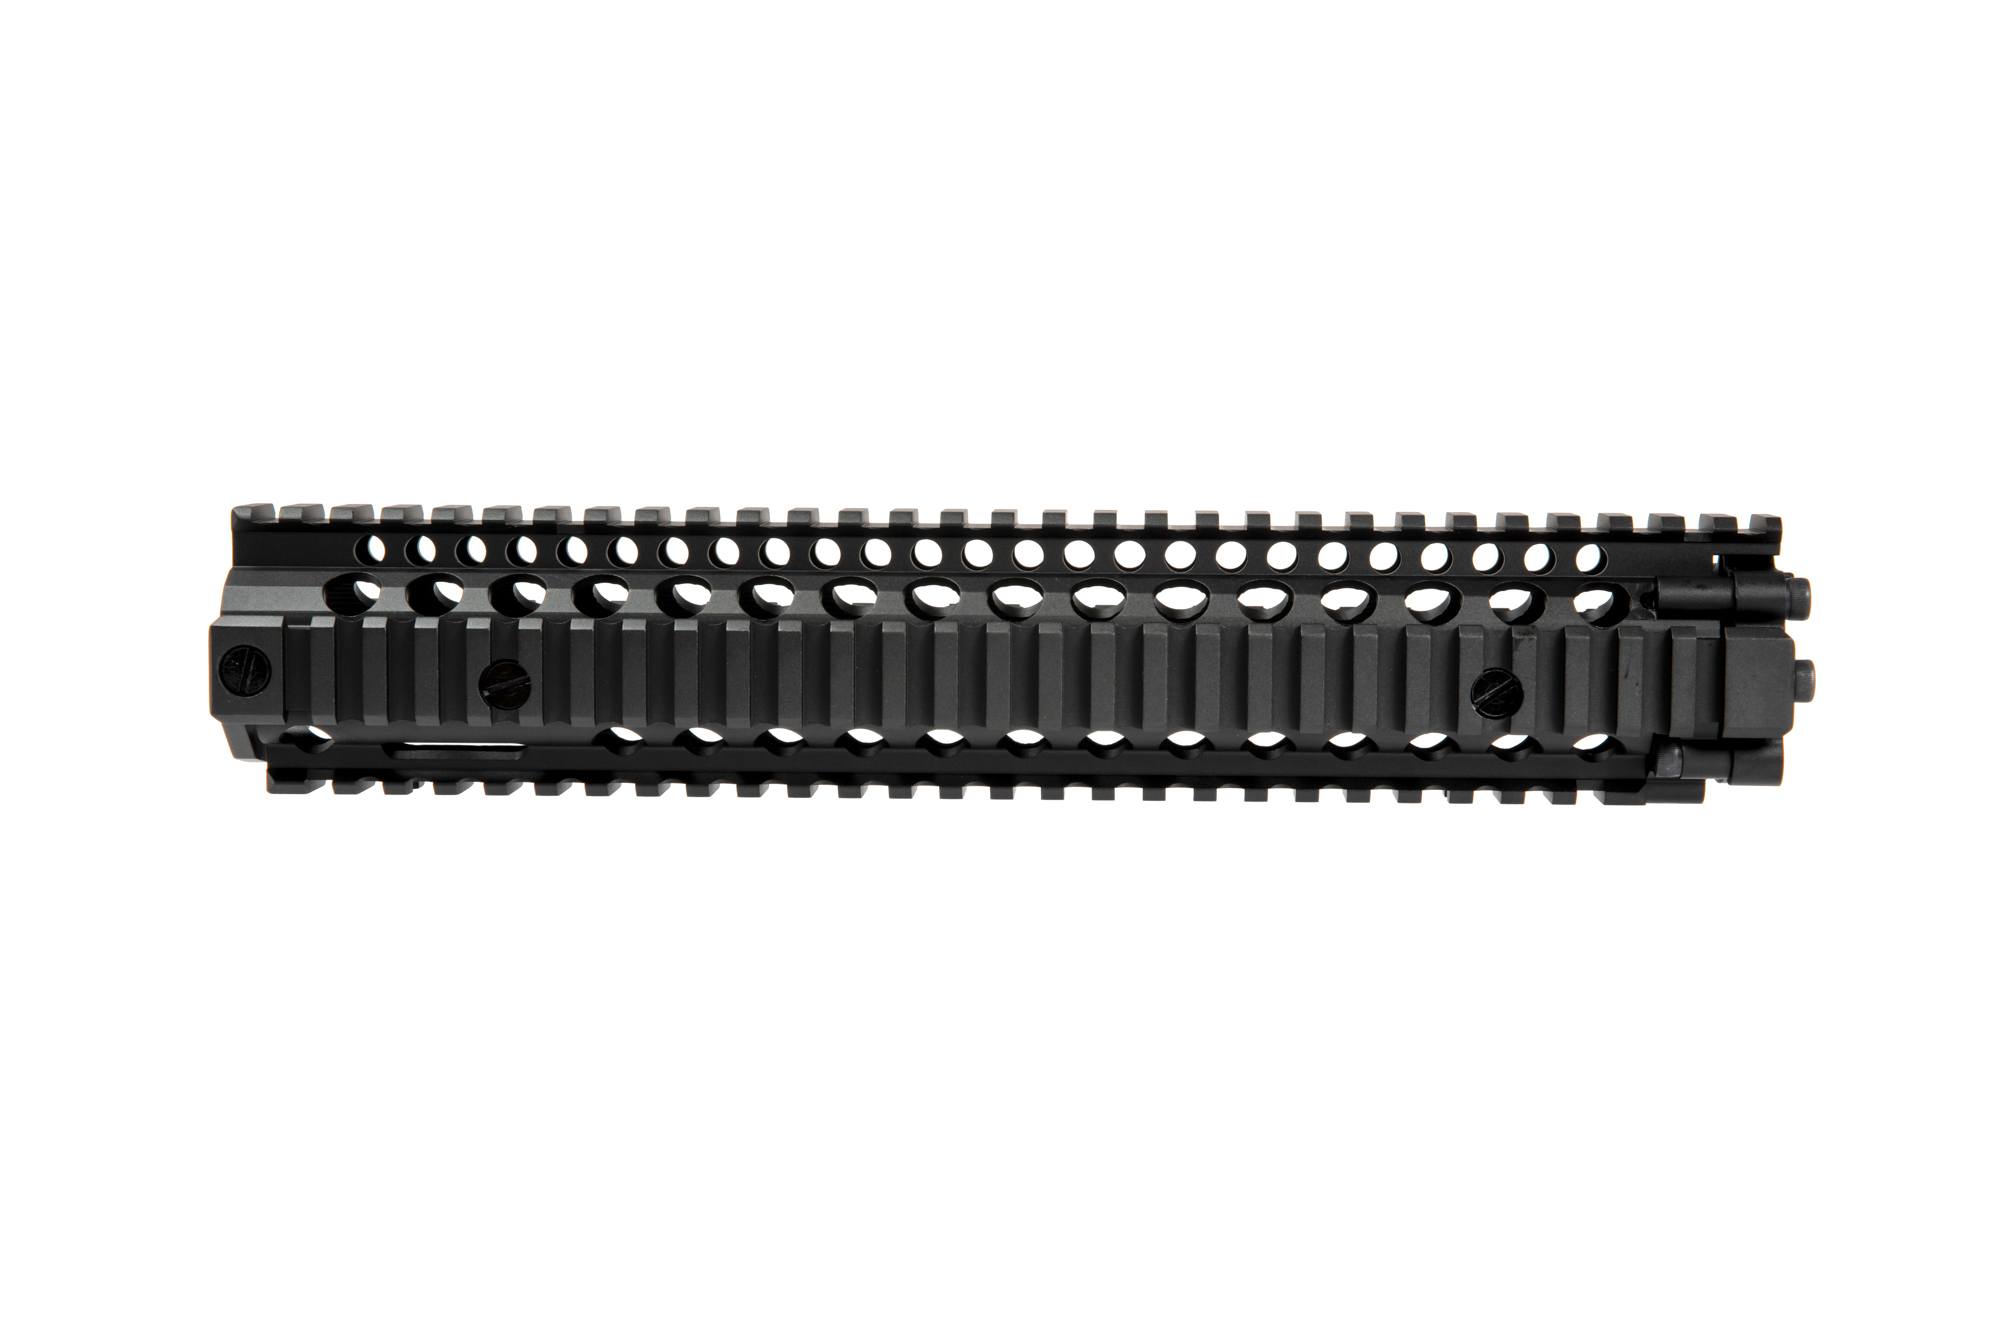 MK18 12" Mounting Rail for M4/M16 by CYMA on Airsoft Mania Europe